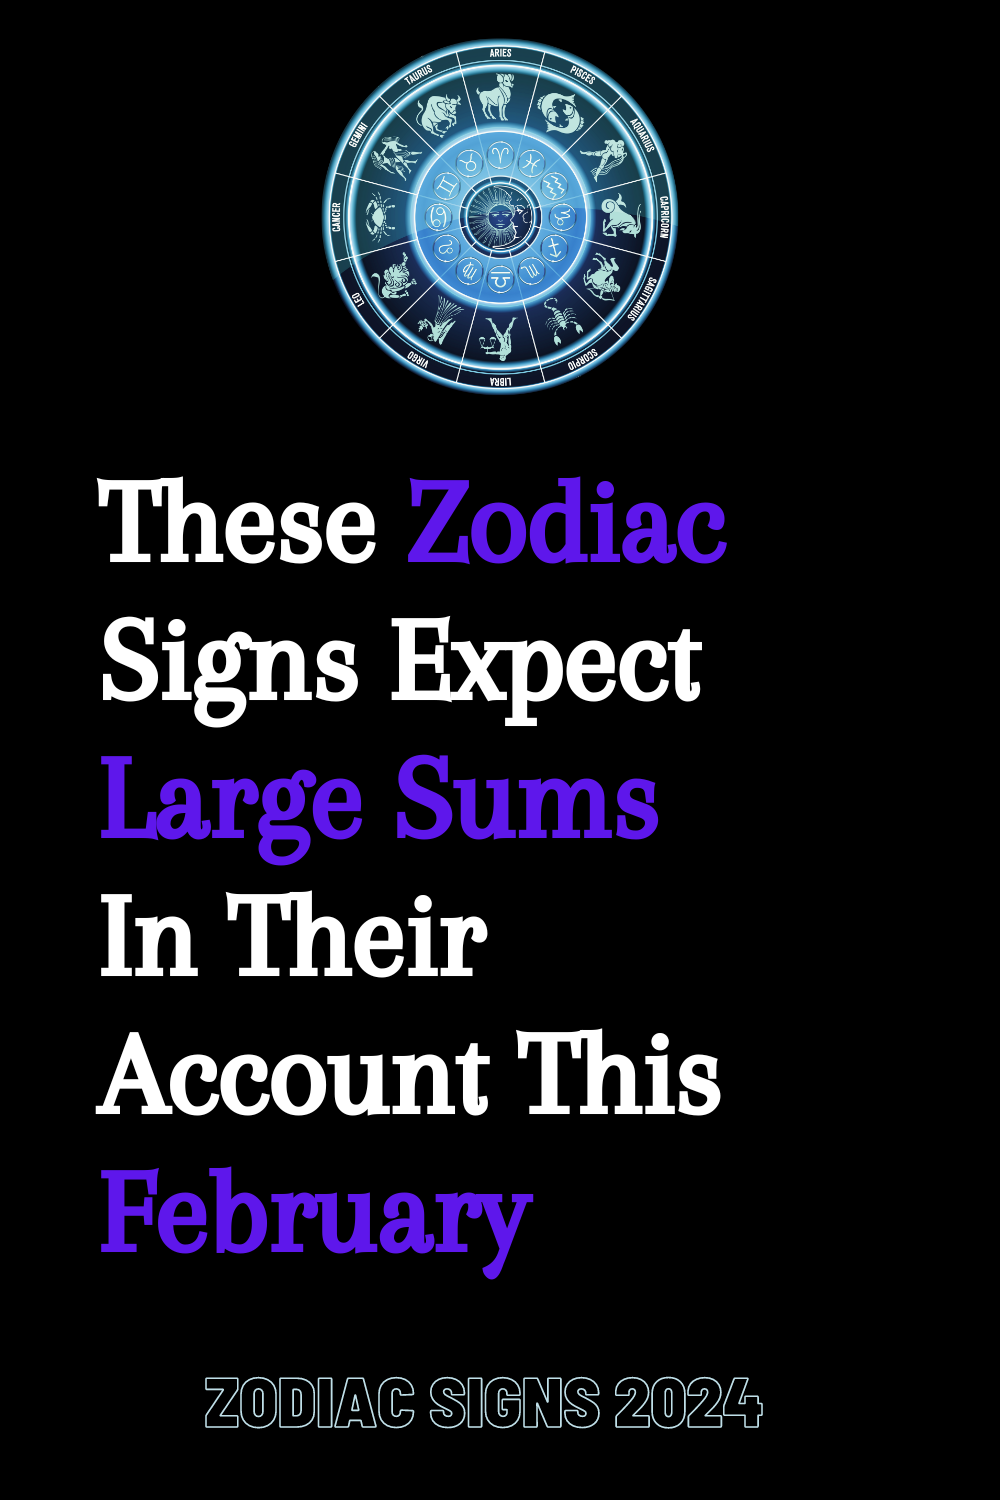 These Zodiac Signs Expect Large Sums In Their Account This February